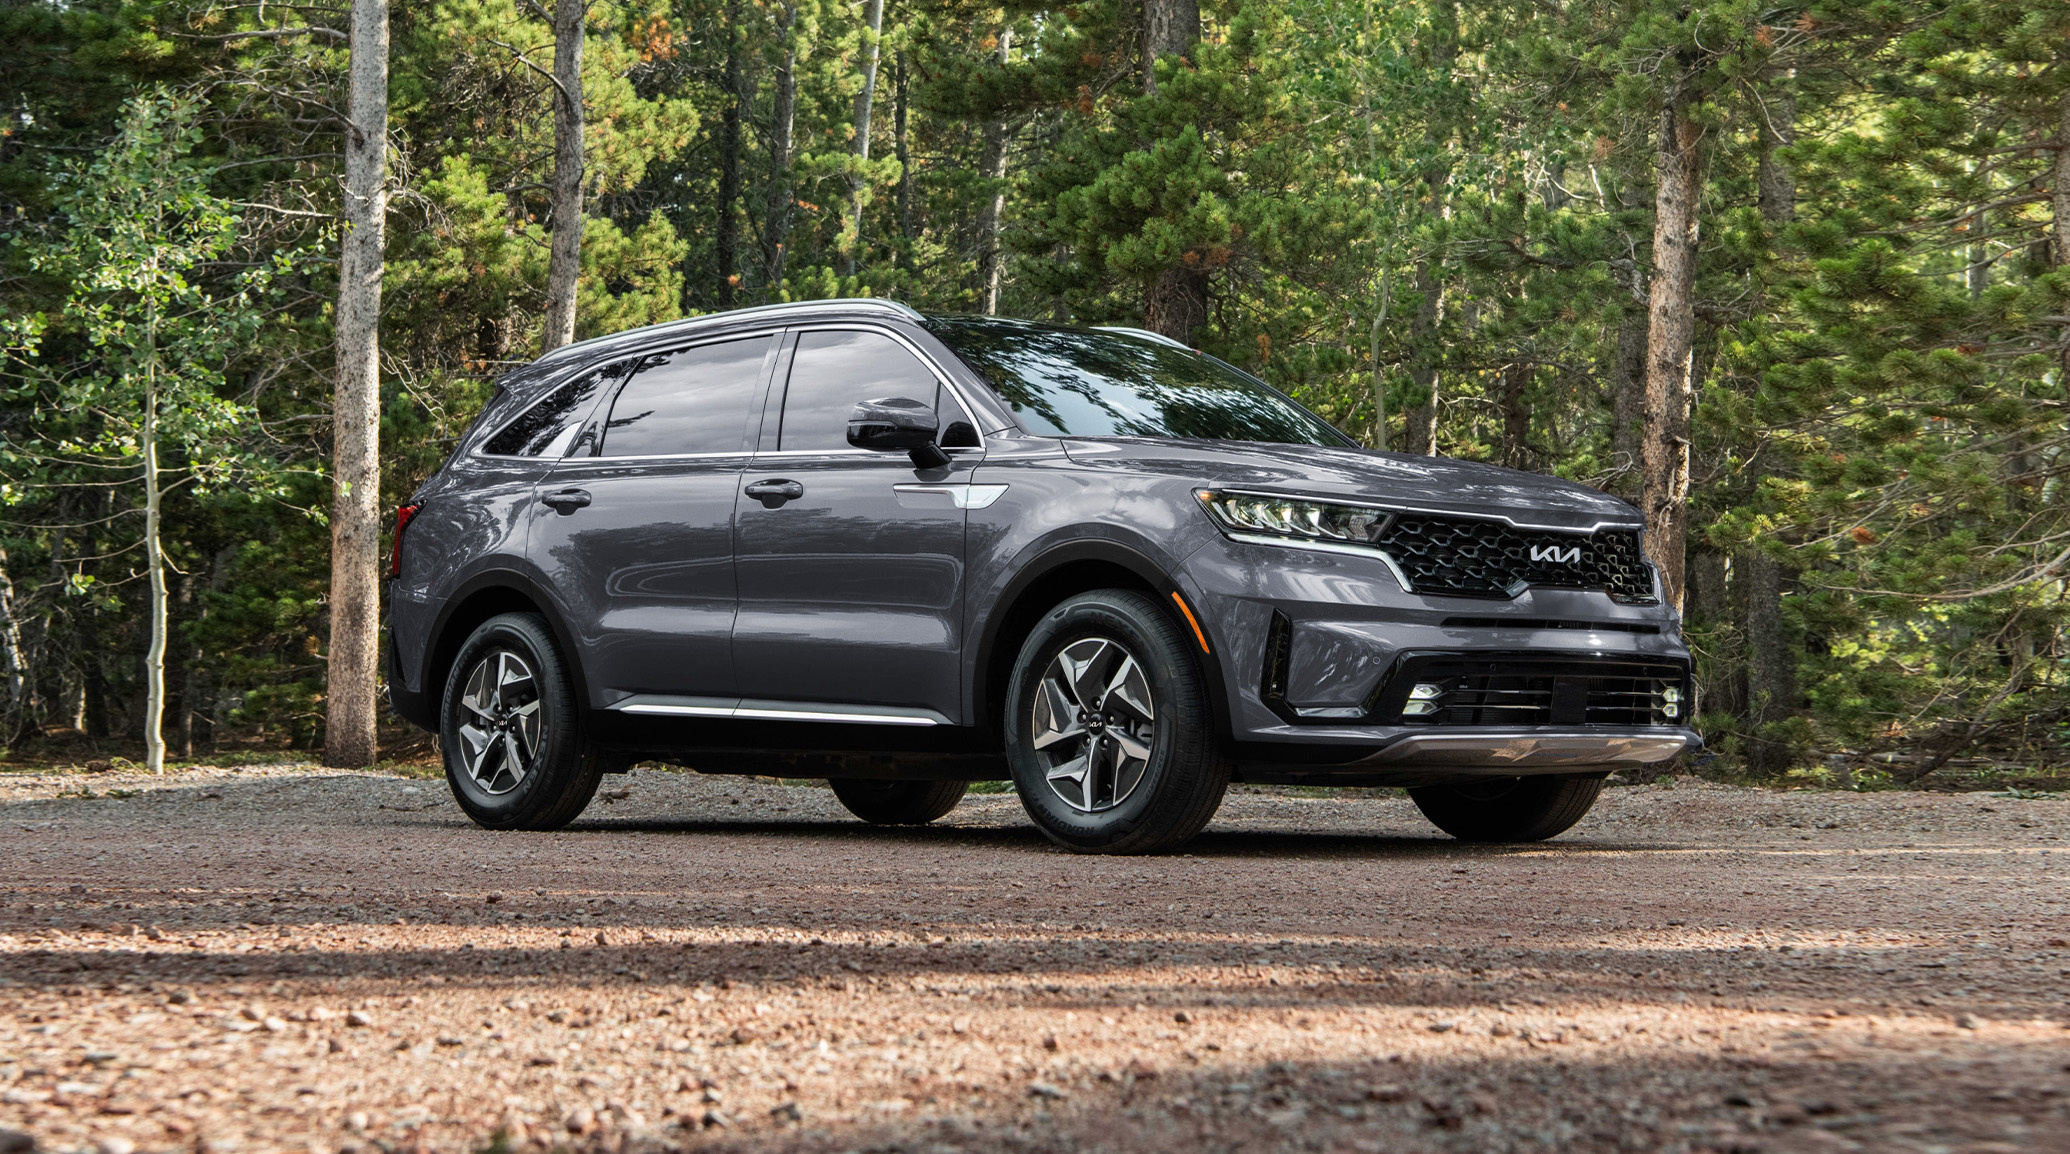 Notable features in the 2024 Kia Sorento include a newly designed grille, a third-row, and a new infotainment system setup.